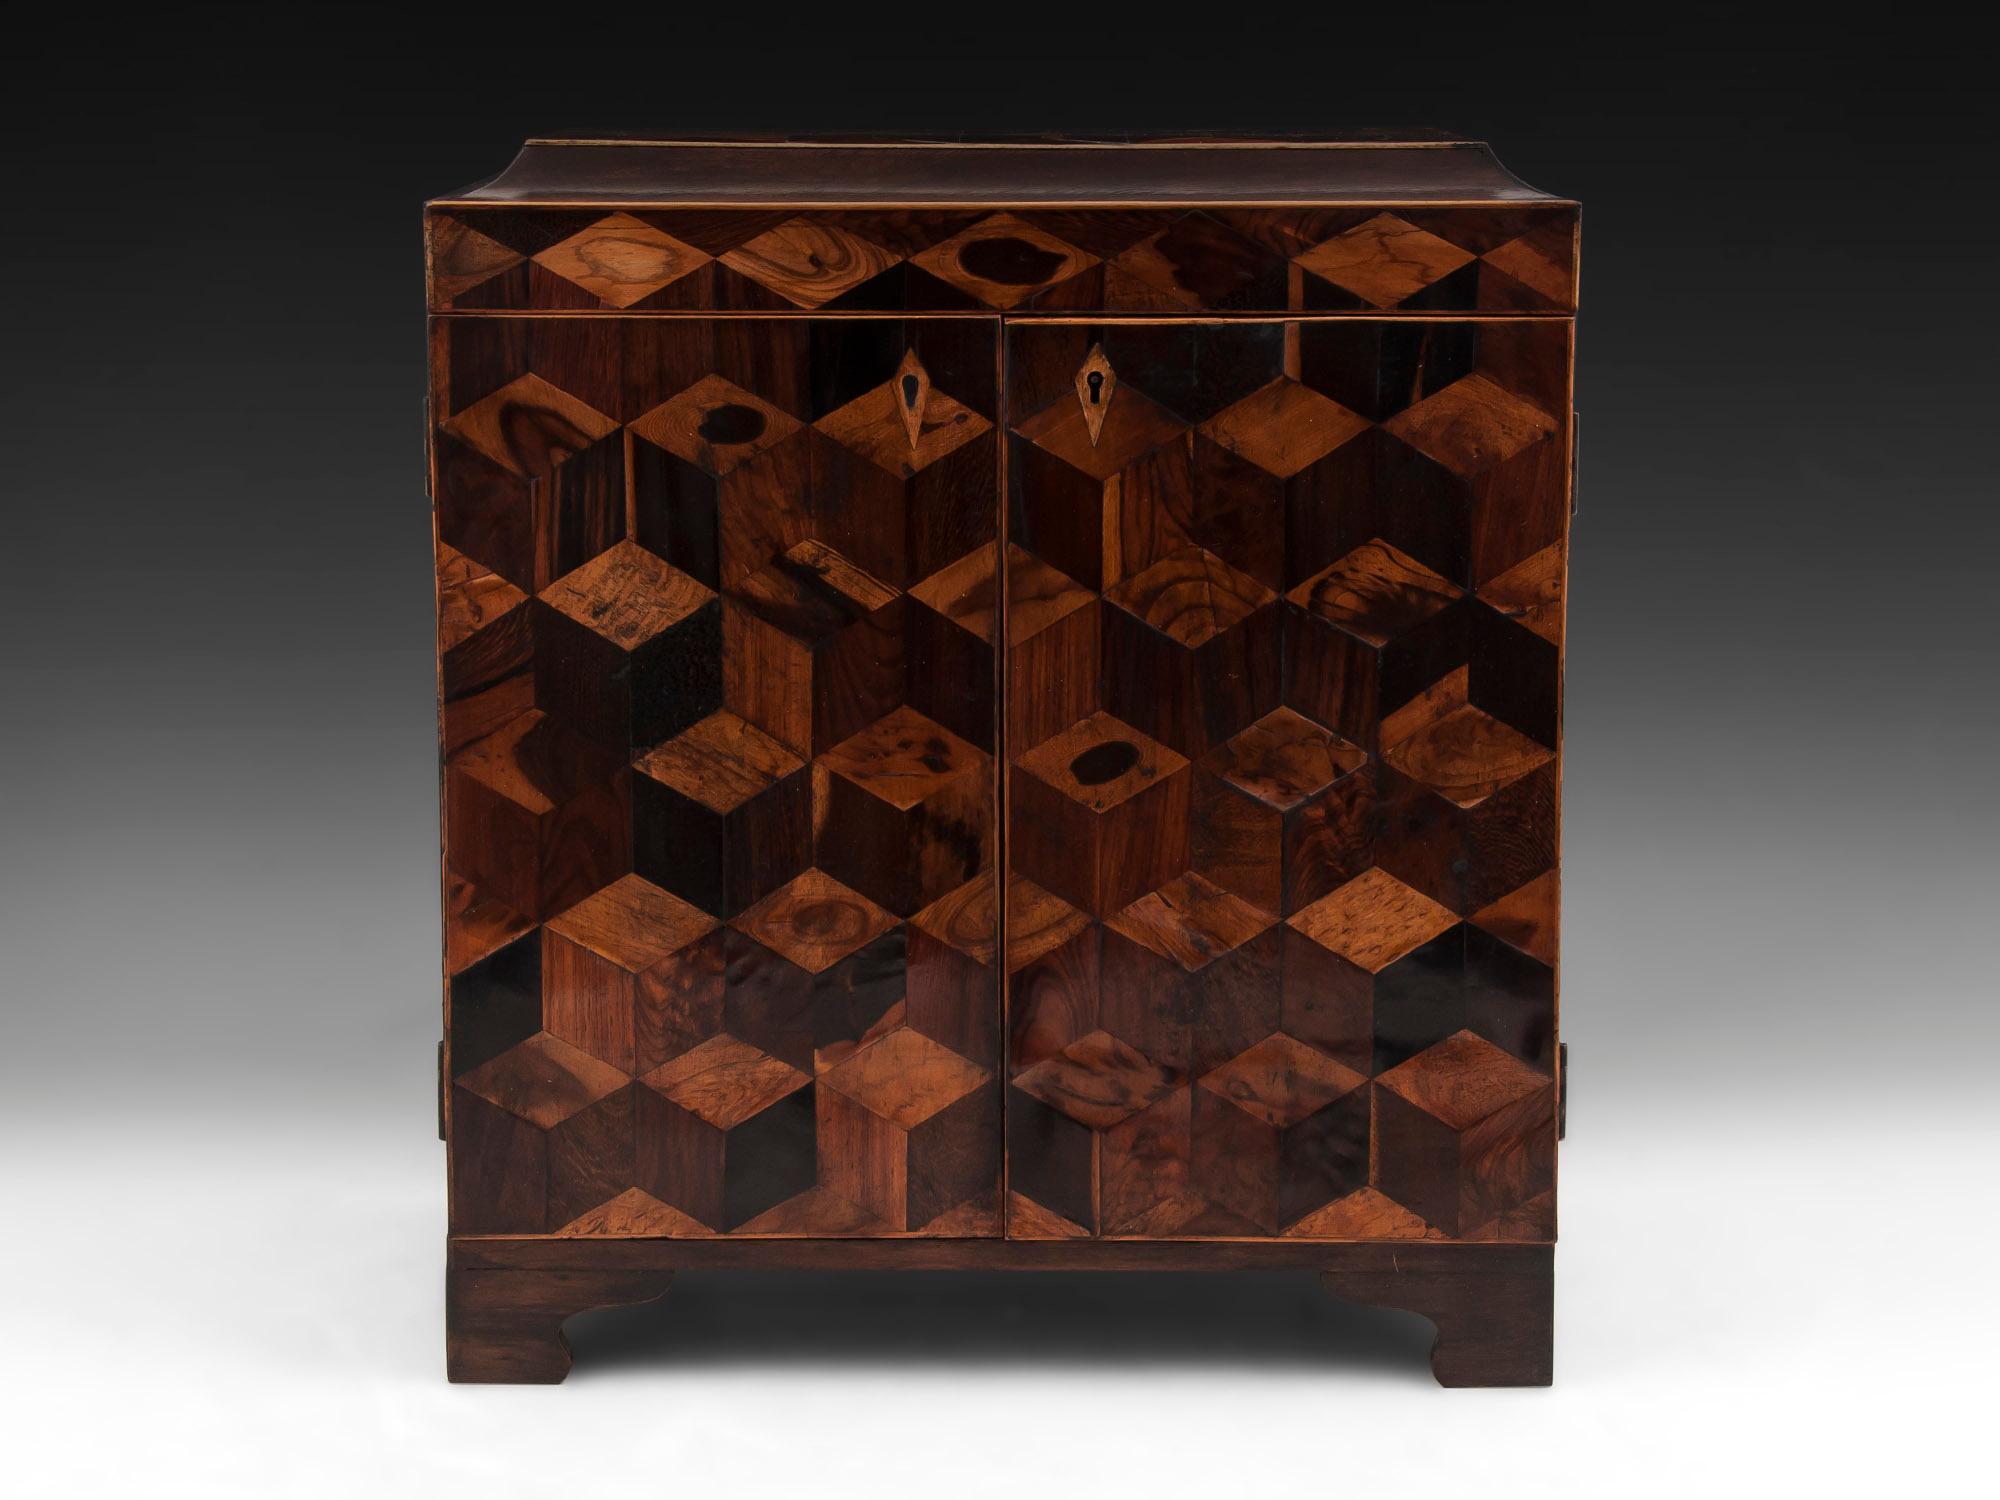 Large Tunbridge ware sewing cabinet with cube perspective design on the front and top, made from various exotic woods including coconut wood, tulipwood, kingwood, and Coromandel.

Once unlocked the top can be lifted to reveal a ruched silk backing